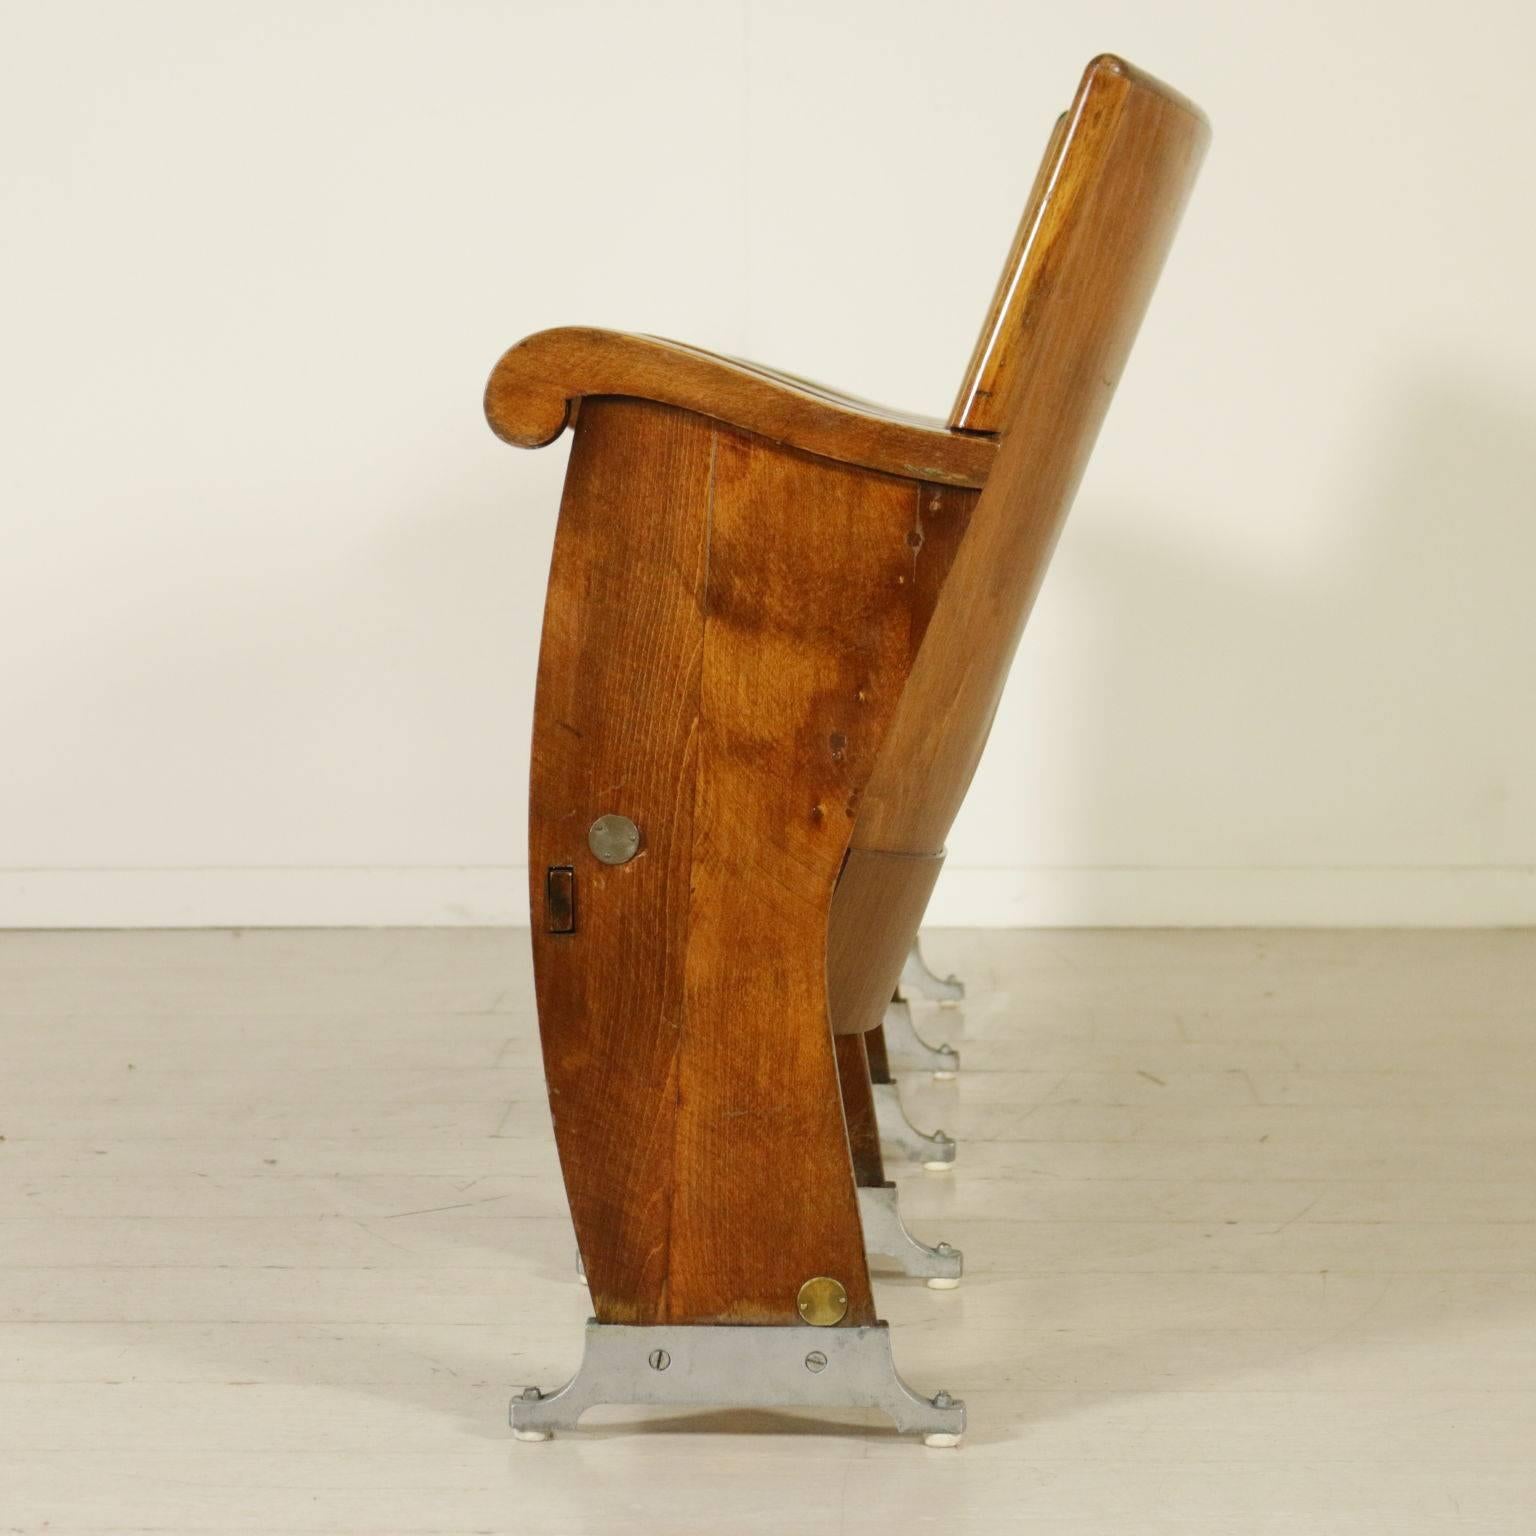 A line of cinema chairs with drop-leaf seat, beech and poplar plywood. Manufactured in Italy, 1960s.